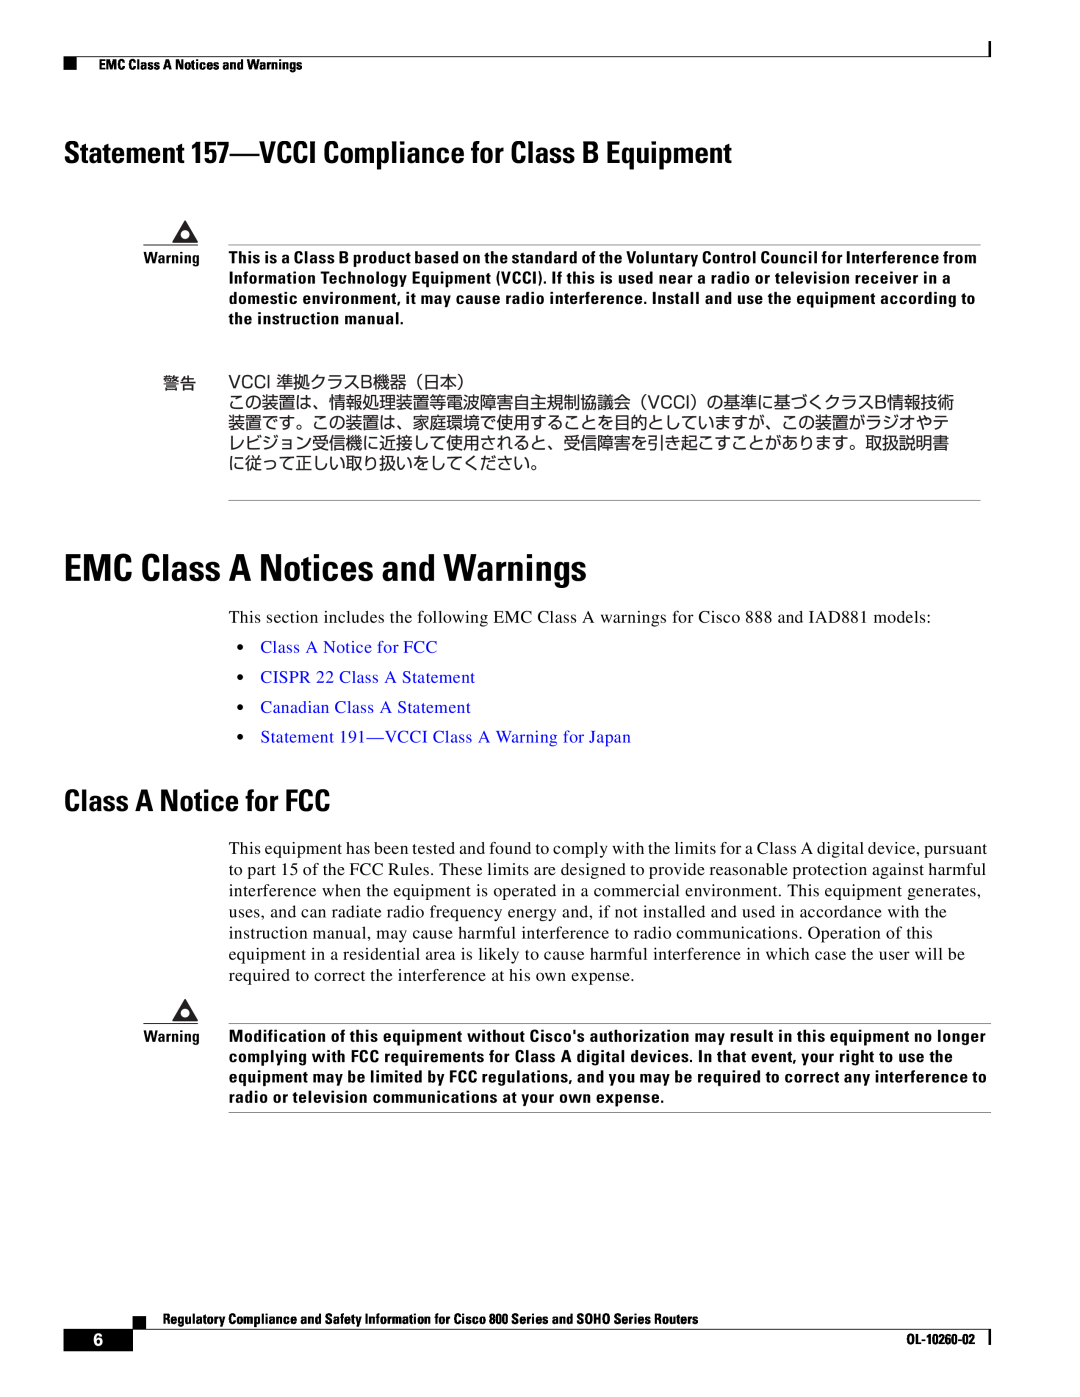 Cisco Systems SOHO Series manual EMC Class A Notices and Warnings, Statement 157-VCCI Compliance for Class B Equipment 